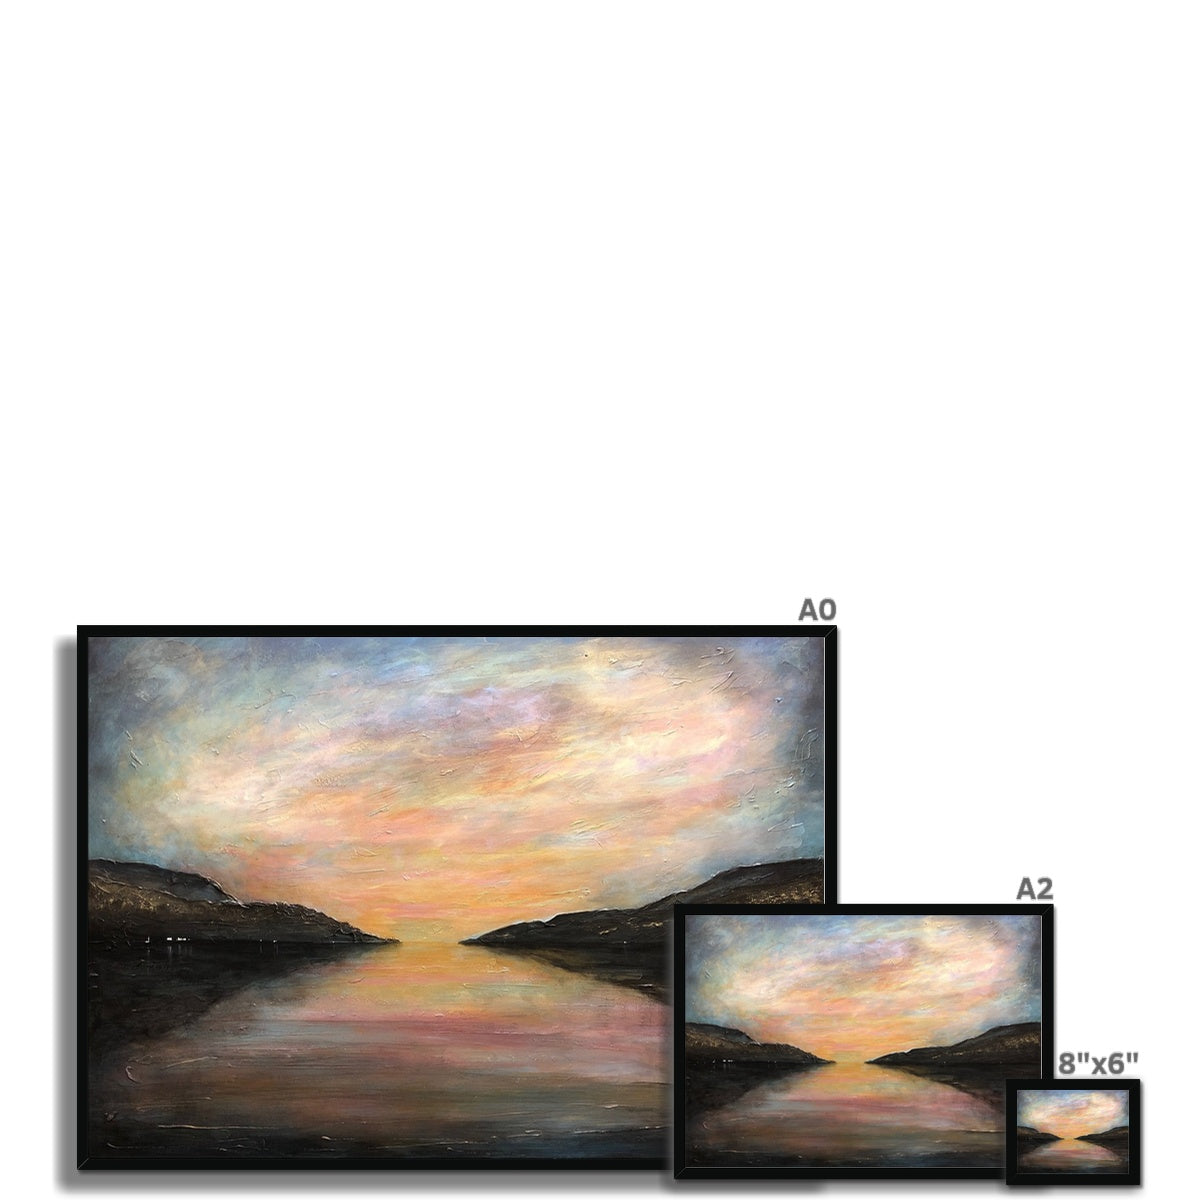 Loch Ness Glow Painting | Framed Prints From Scotland-Framed Prints-Scottish Lochs & Mountains Art Gallery-Paintings, Prints, Homeware, Art Gifts From Scotland By Scottish Artist Kevin Hunter